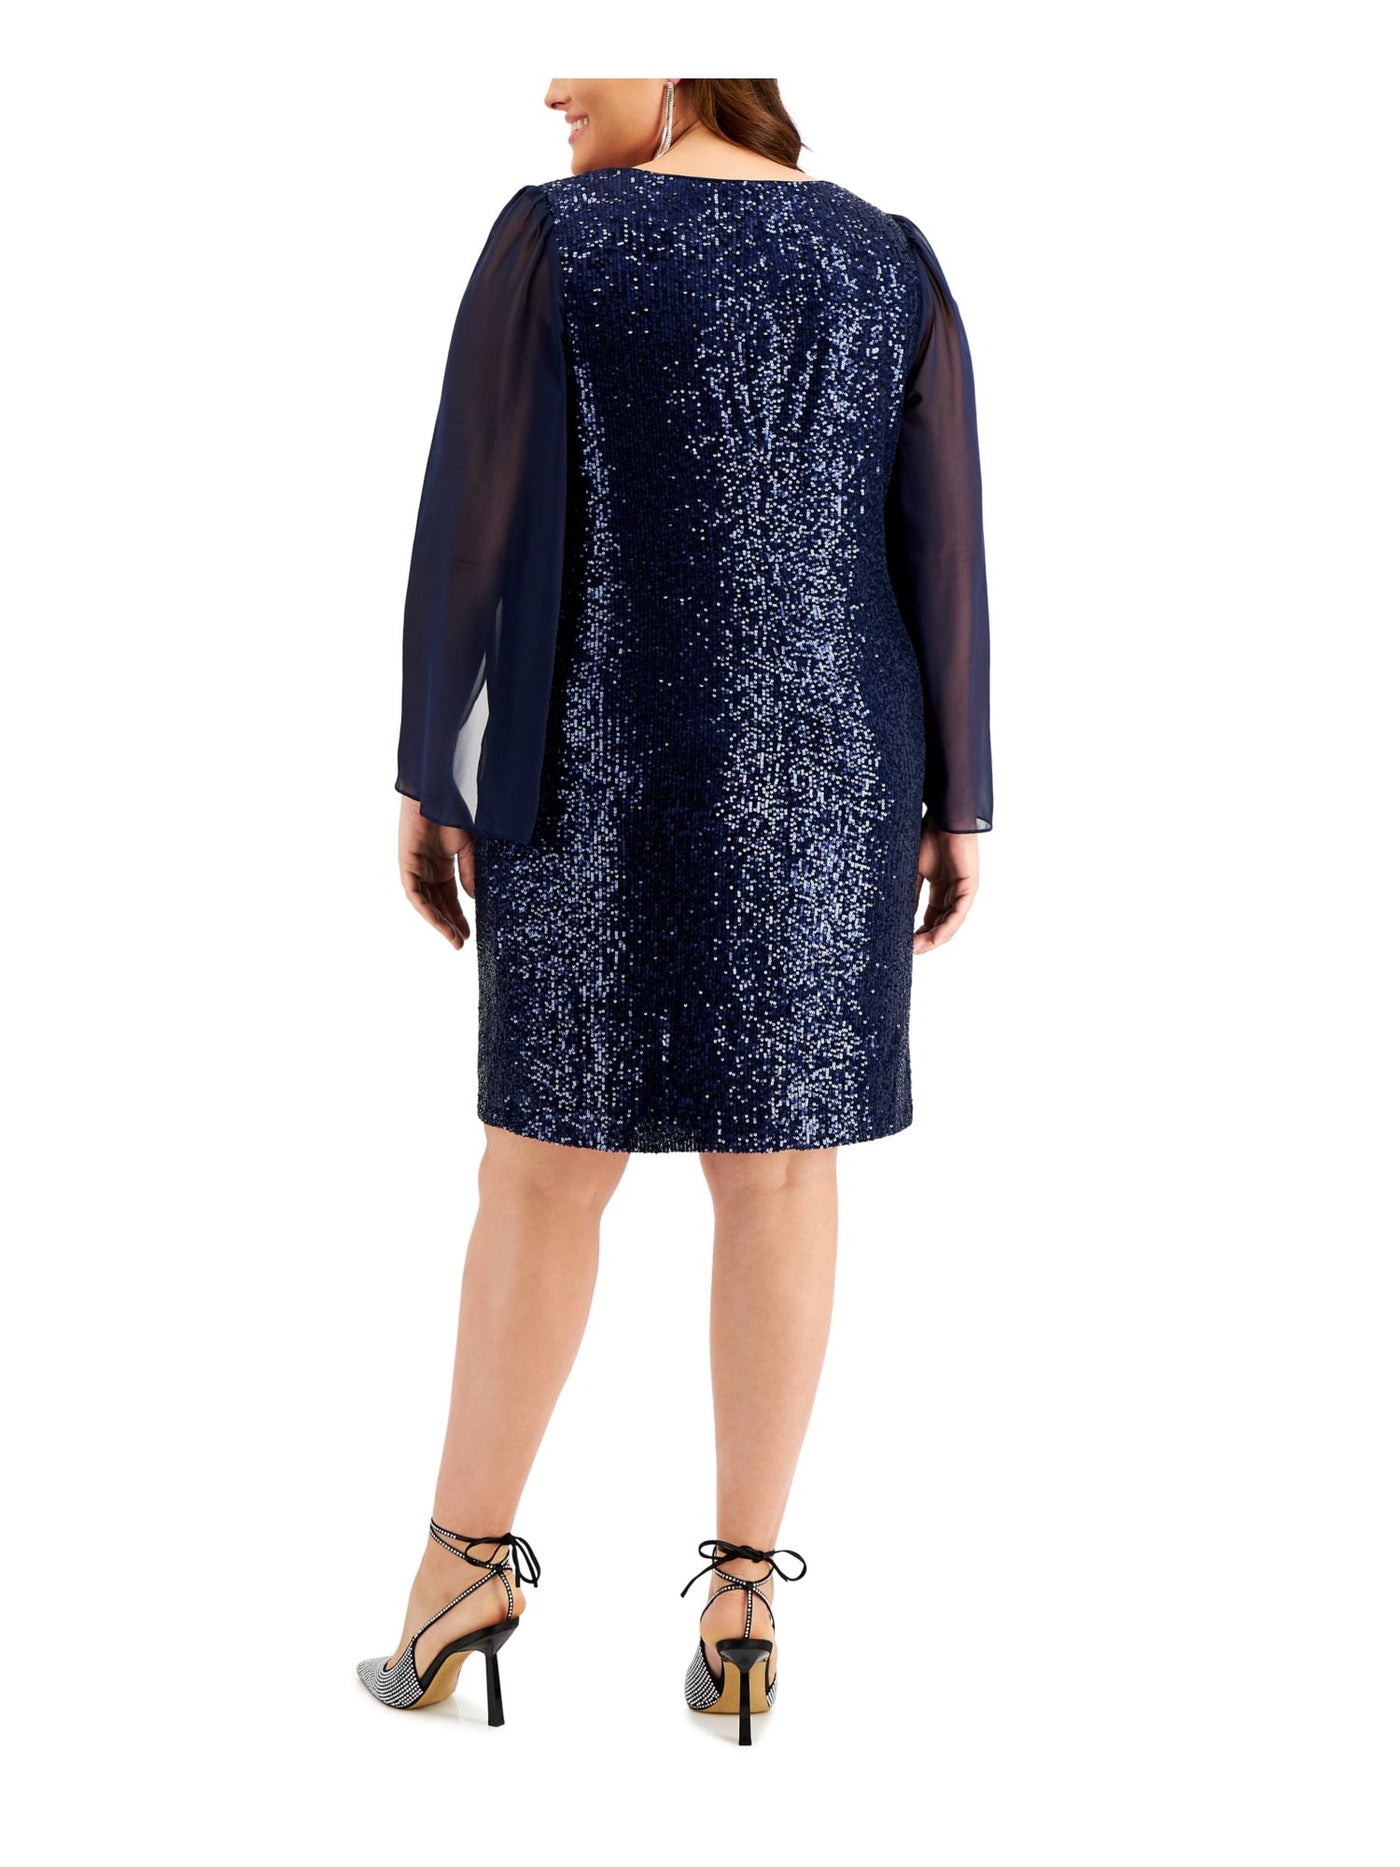 CONNECTED APPAREL Womens Navy Sequined Sheer Pull Over Lined Darted Long Sleeve Round Neck Knee Length Party Sheath Dress Plus 14W